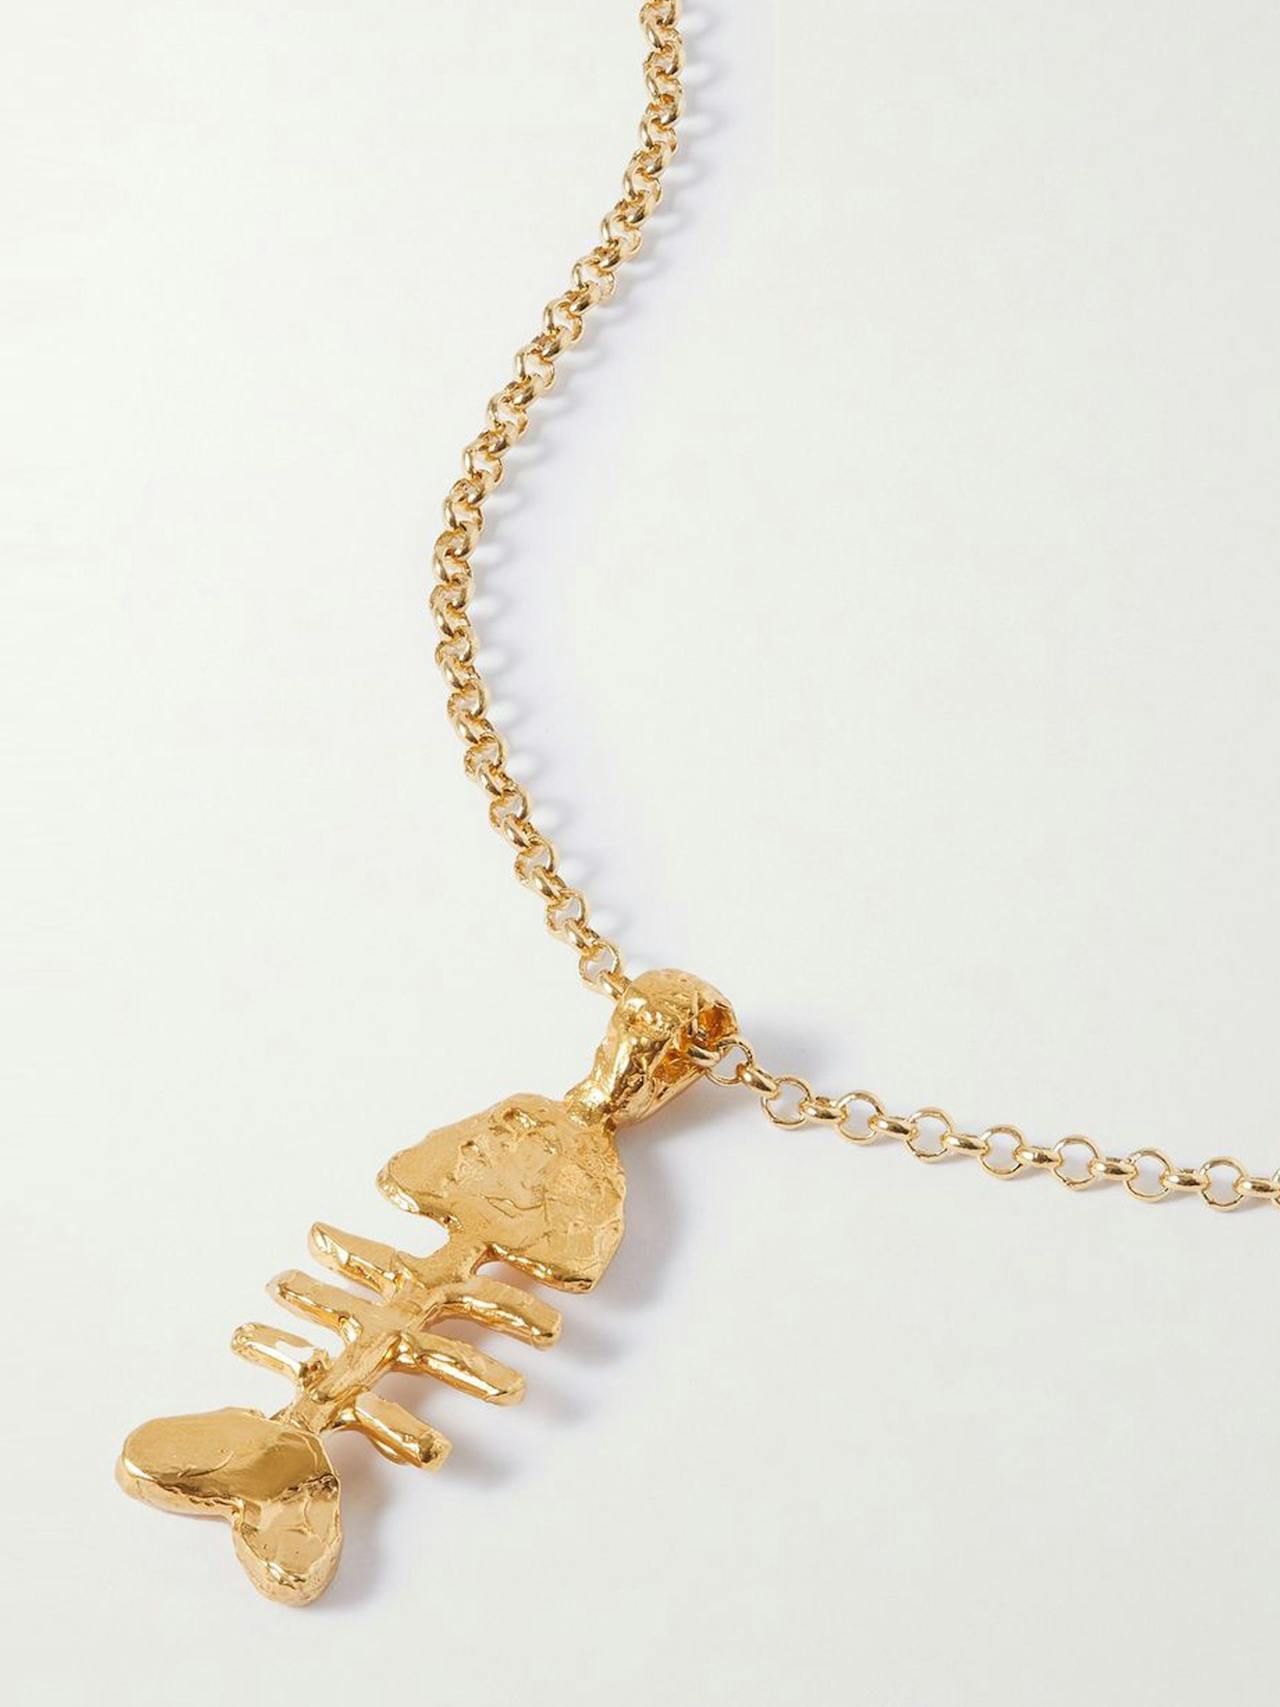 The Silhouette of Summer gold-plated necklace